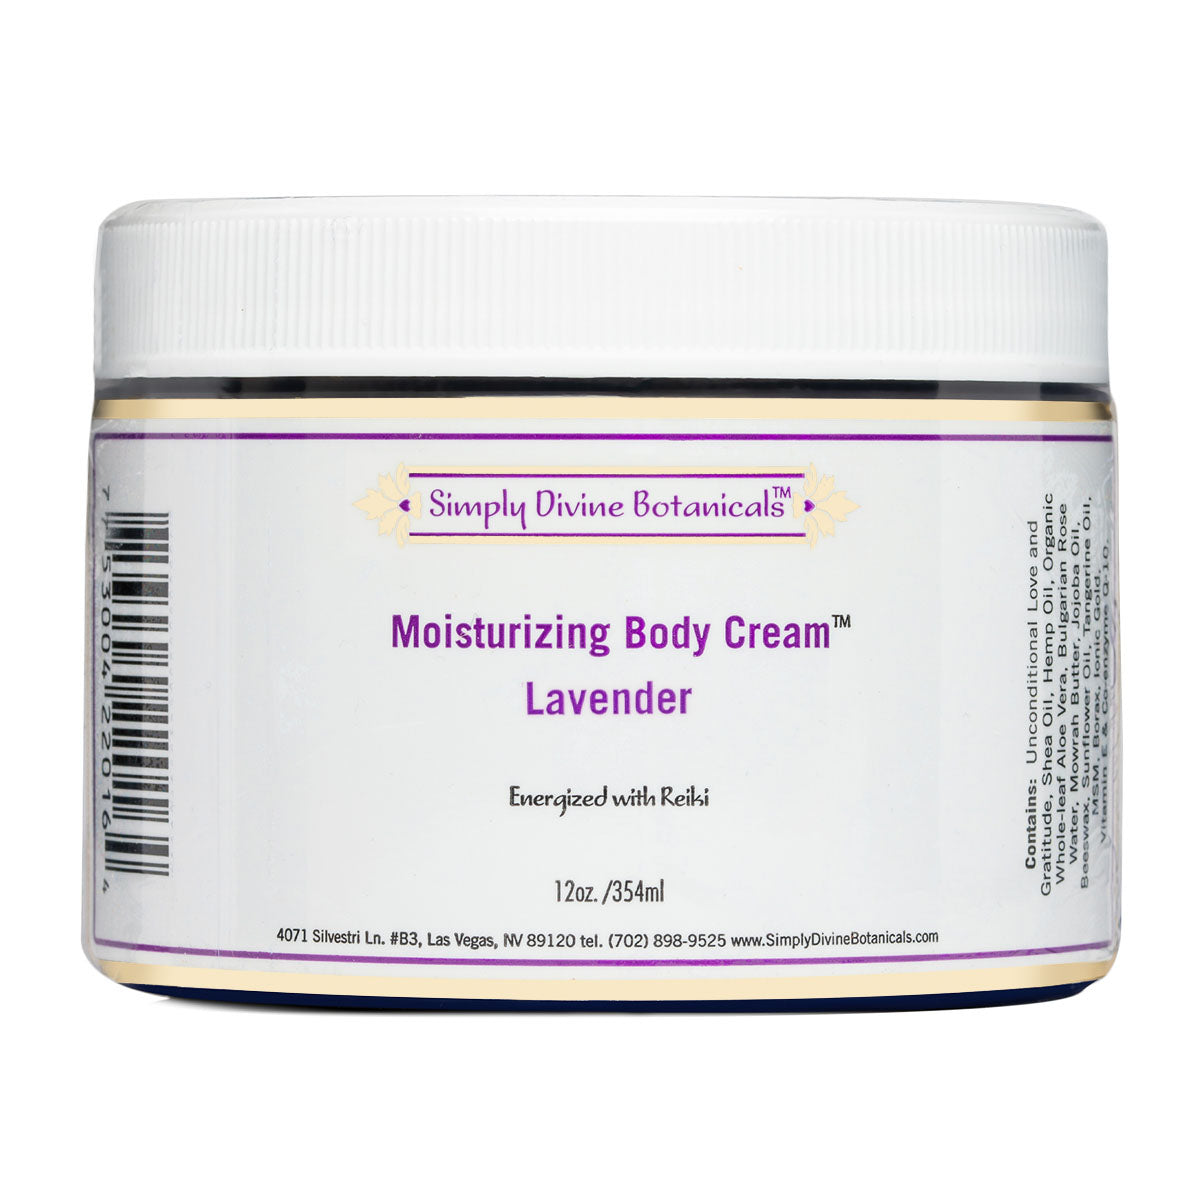 Body Cream Lavender | Simply Divine Botanicals | Raw Living UK | Skin Care &amp; Beauty | Simply Divine Botanicals Natural Body Creme is a Rich &amp; Luxurious Cream Moisturiser for the Hands &amp; Body. Use it all over to enjoy Soft Fragrant Skin.